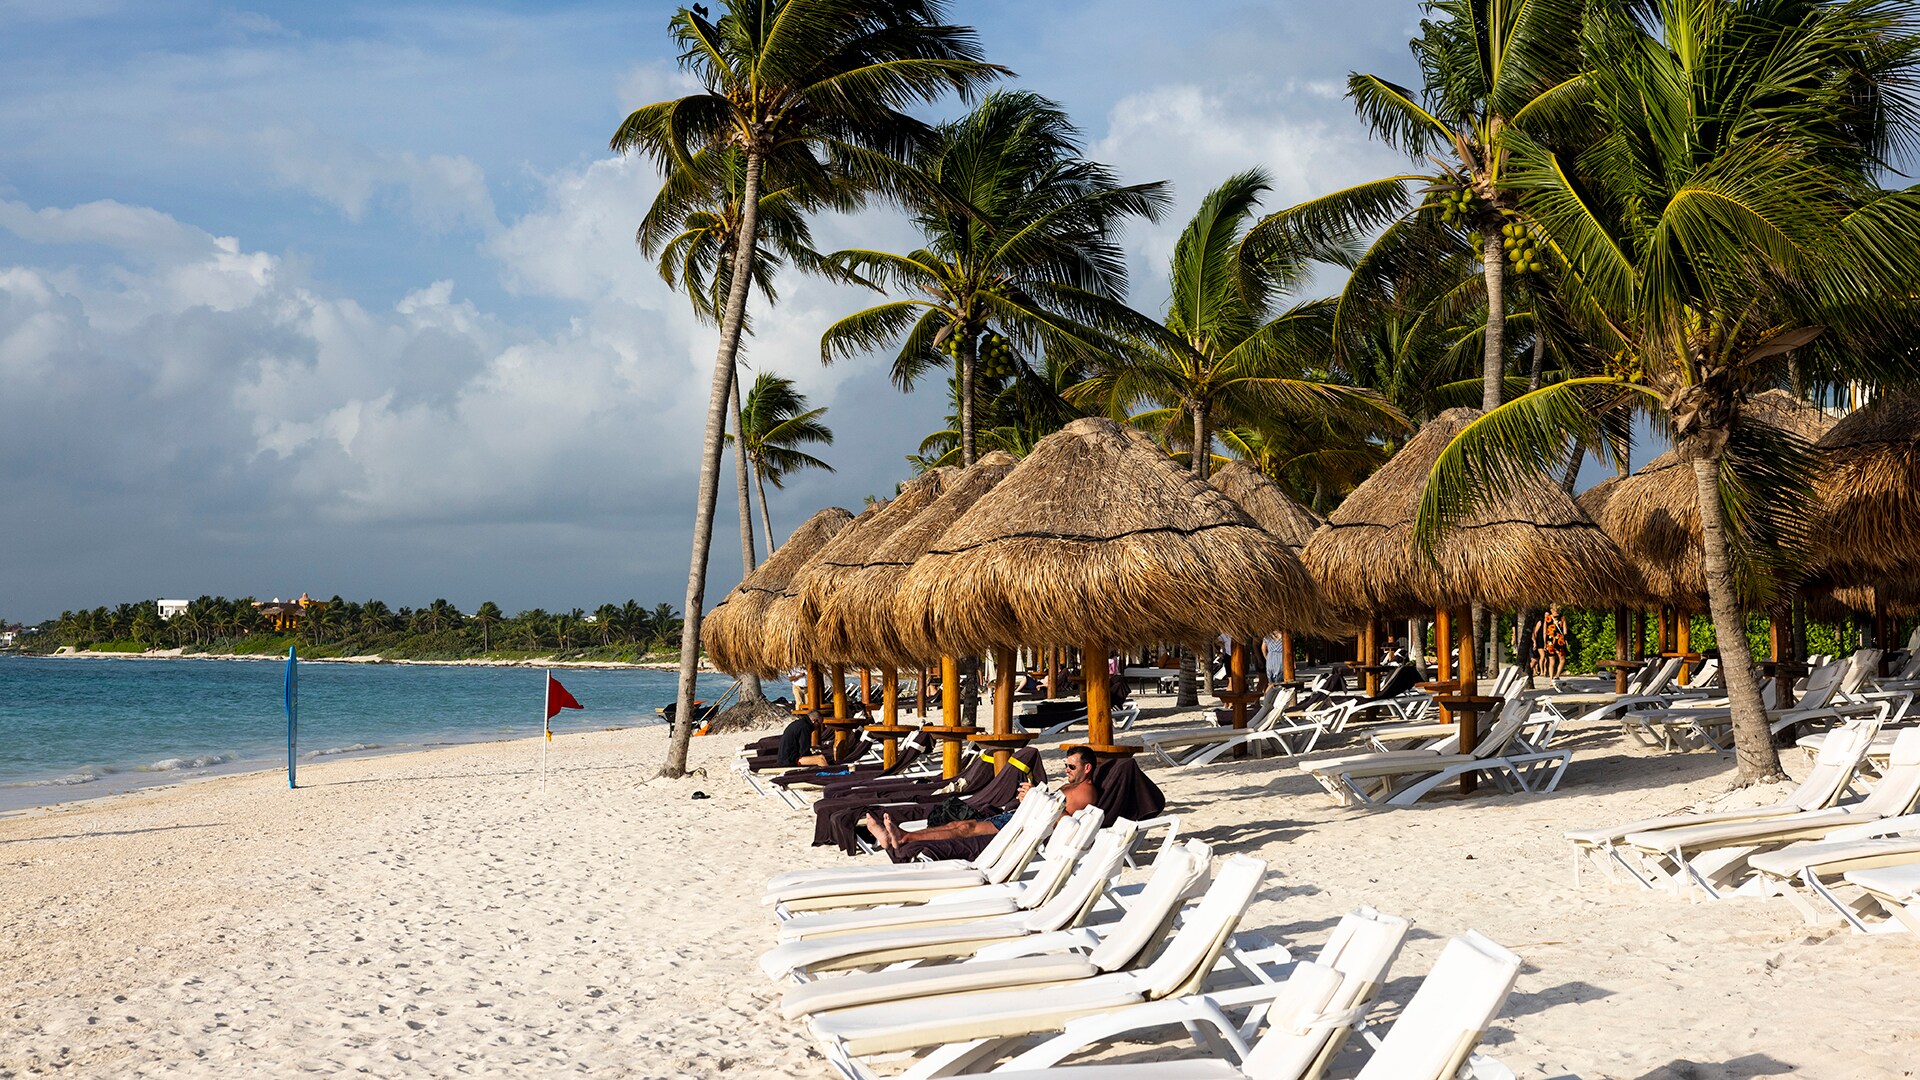 Palm trees sway on the beach in Akumal, Mexico.